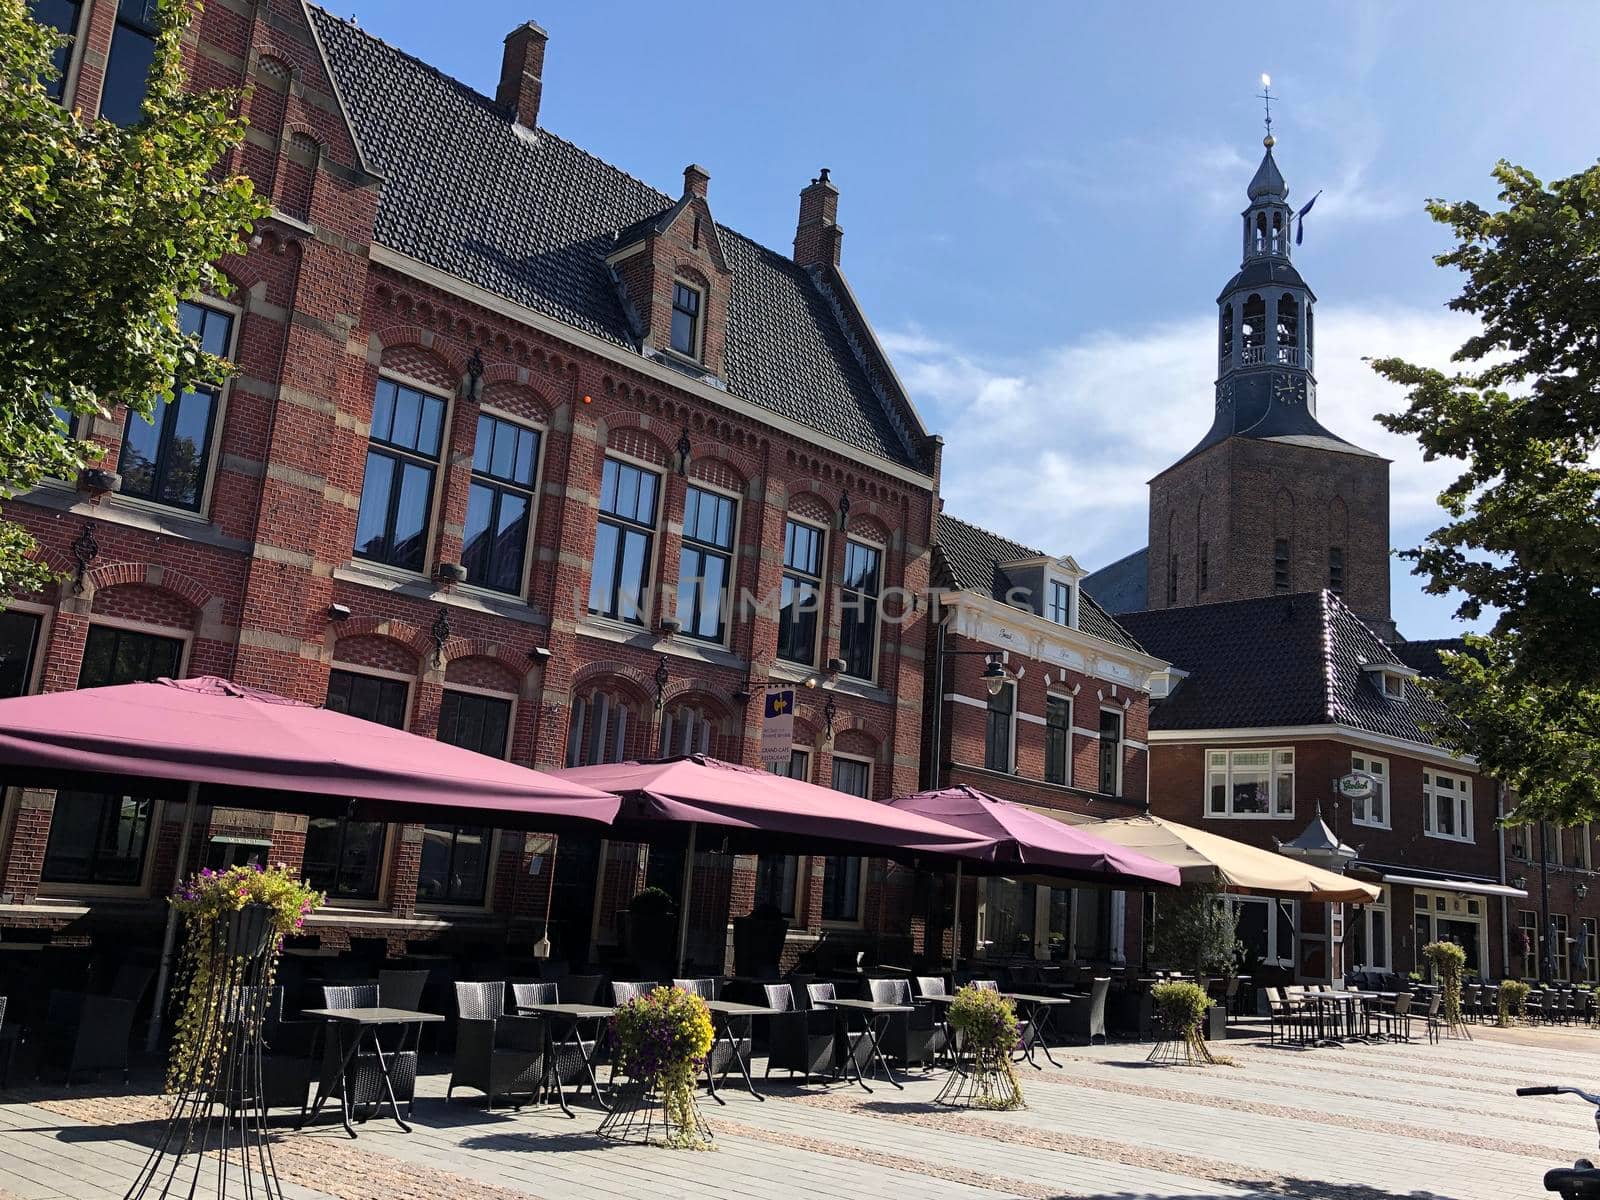 Old town of Groenlo, The Netherlands